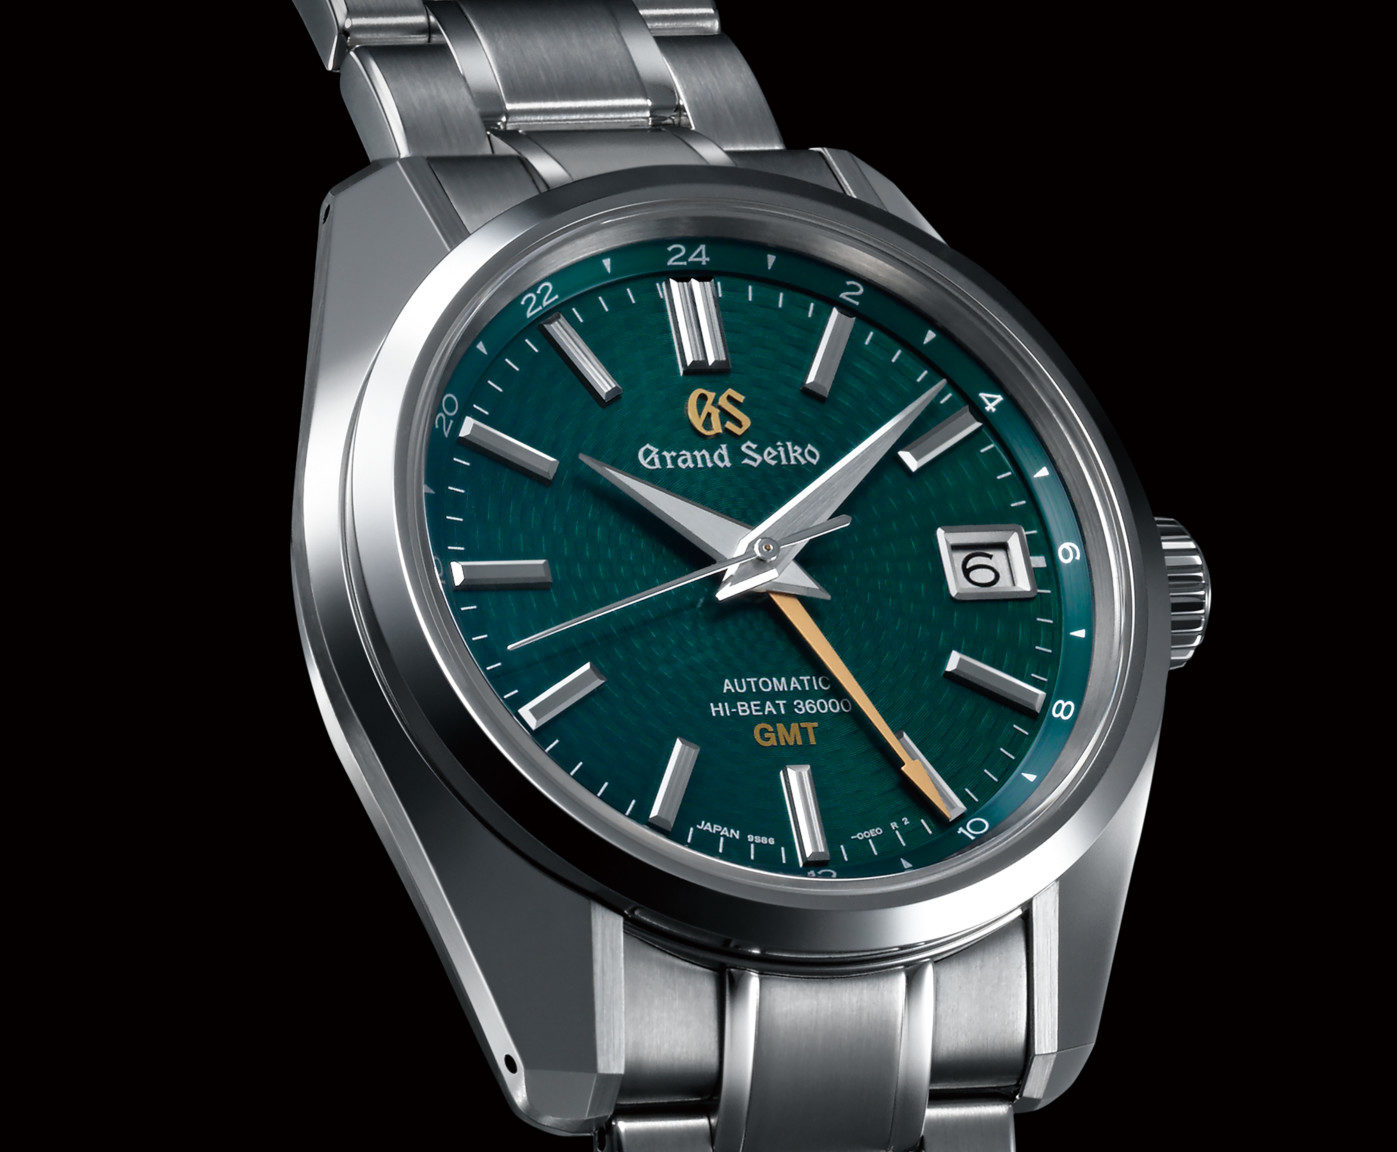 IN PICTURES: Peacock-inspired Grand Seiko Hi-beat 36000 GMT